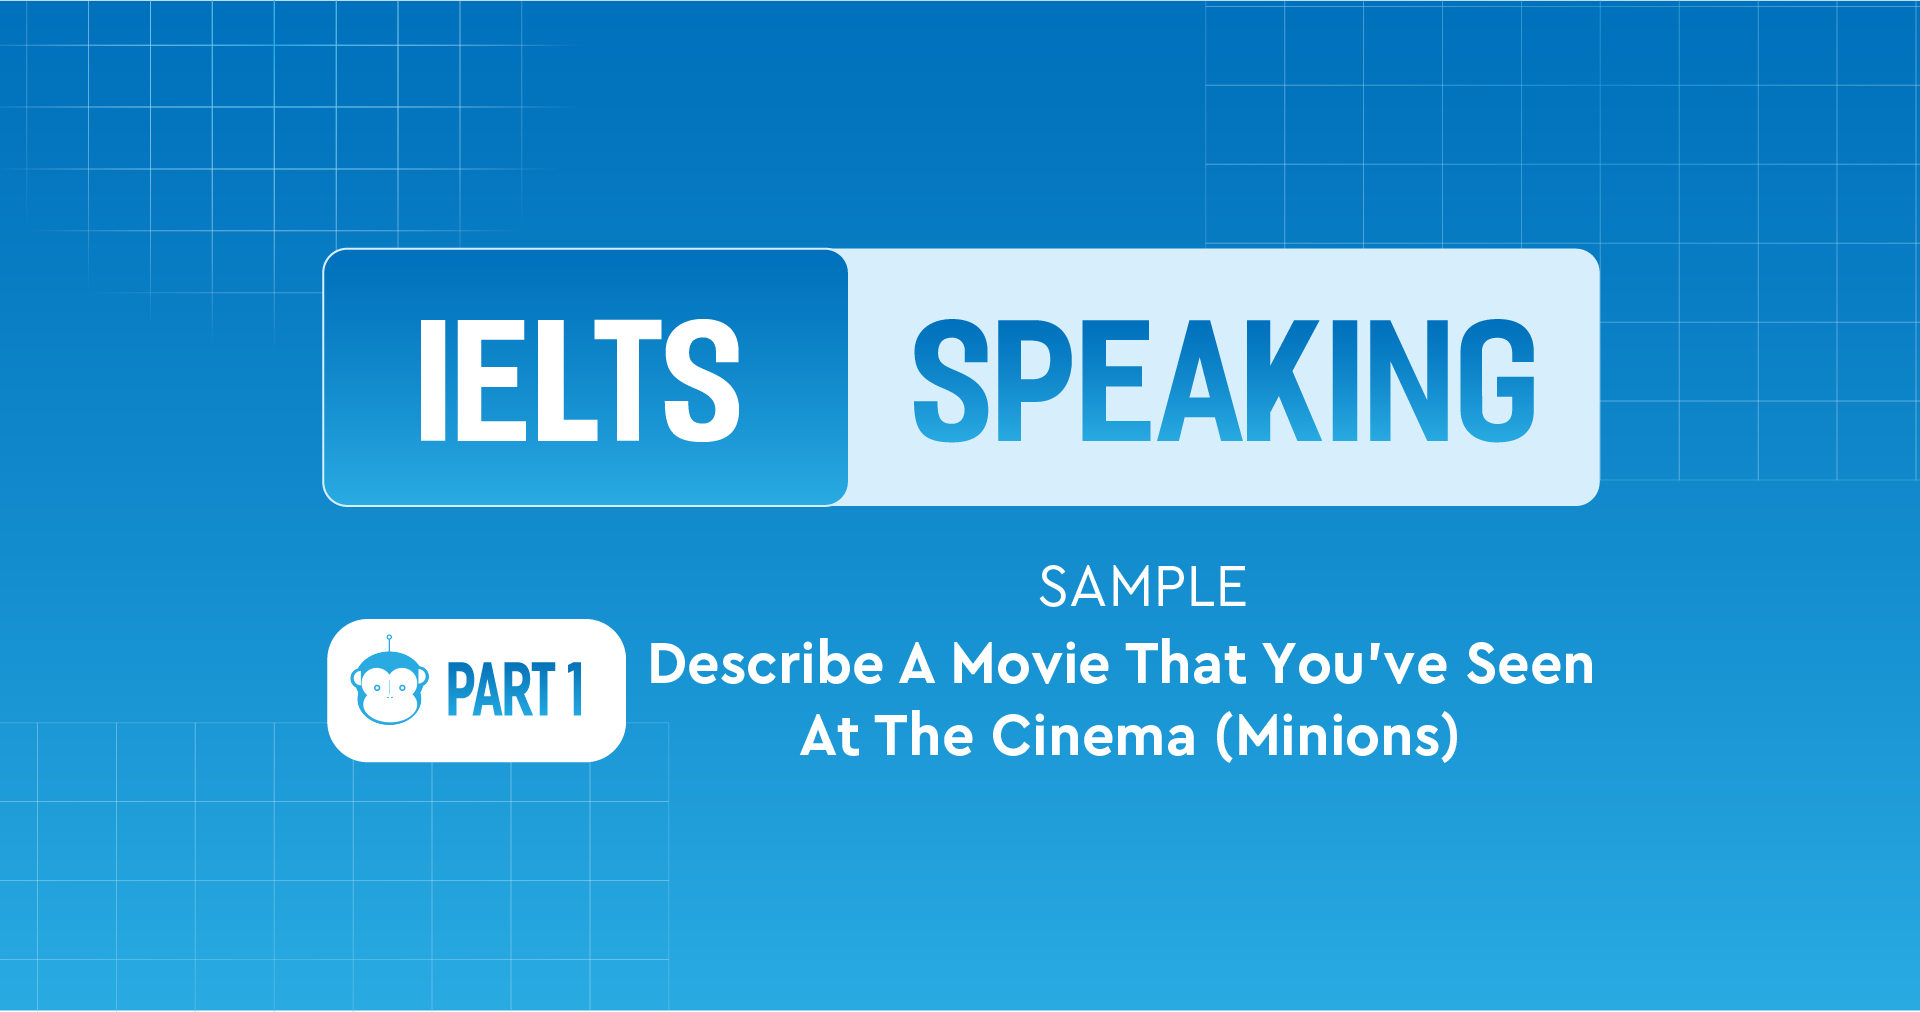 Describe a movie that you’ve seen at the cinema (Minions) - Sample IELTS Speaking Part 1